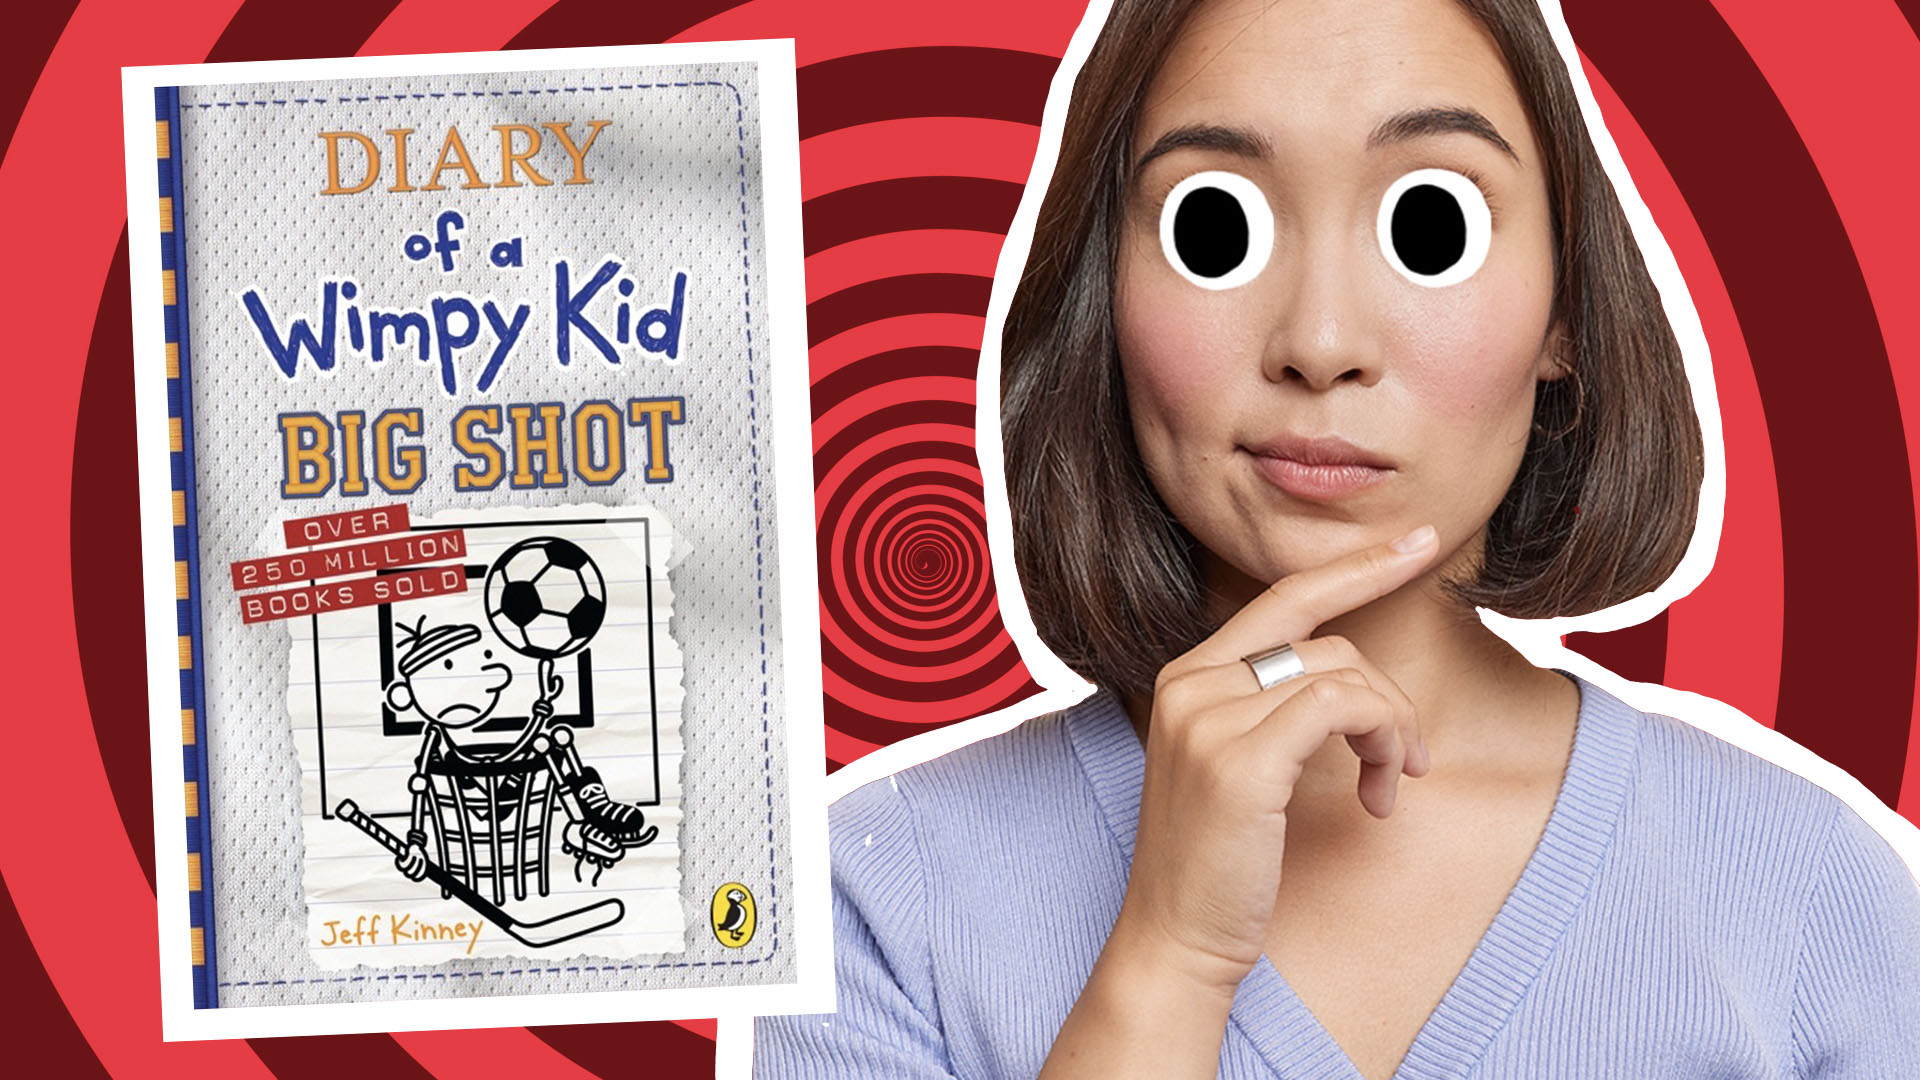 A Diary of a Wimpy Kid book